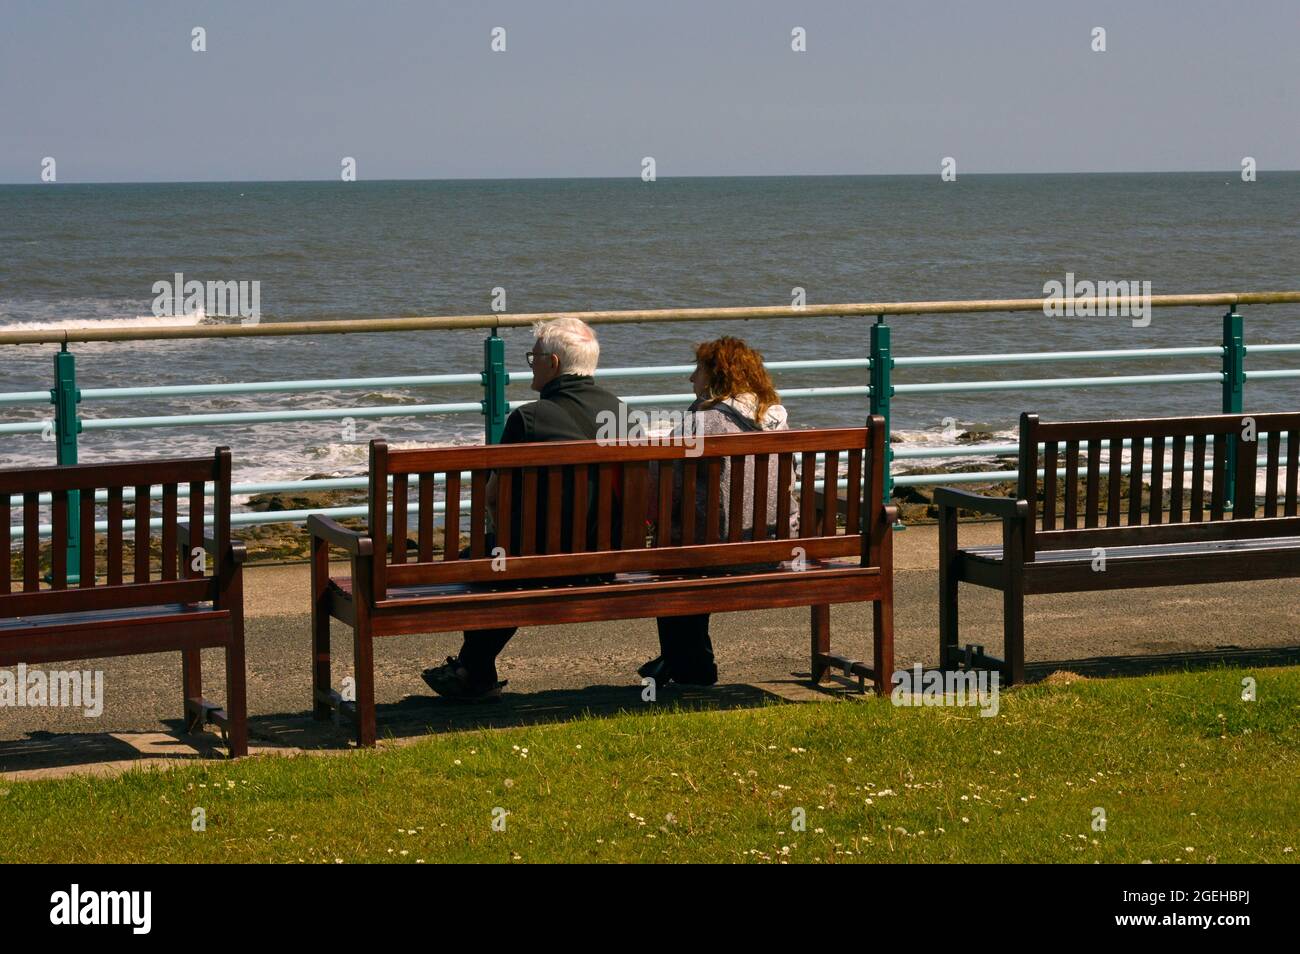 WHITLEY BAY. TYNE and WEAR. ENGLAND. 05-27-21. A man and woman seated on a bench on the promenade, overlooking the beach and North Sea. Stock Photo